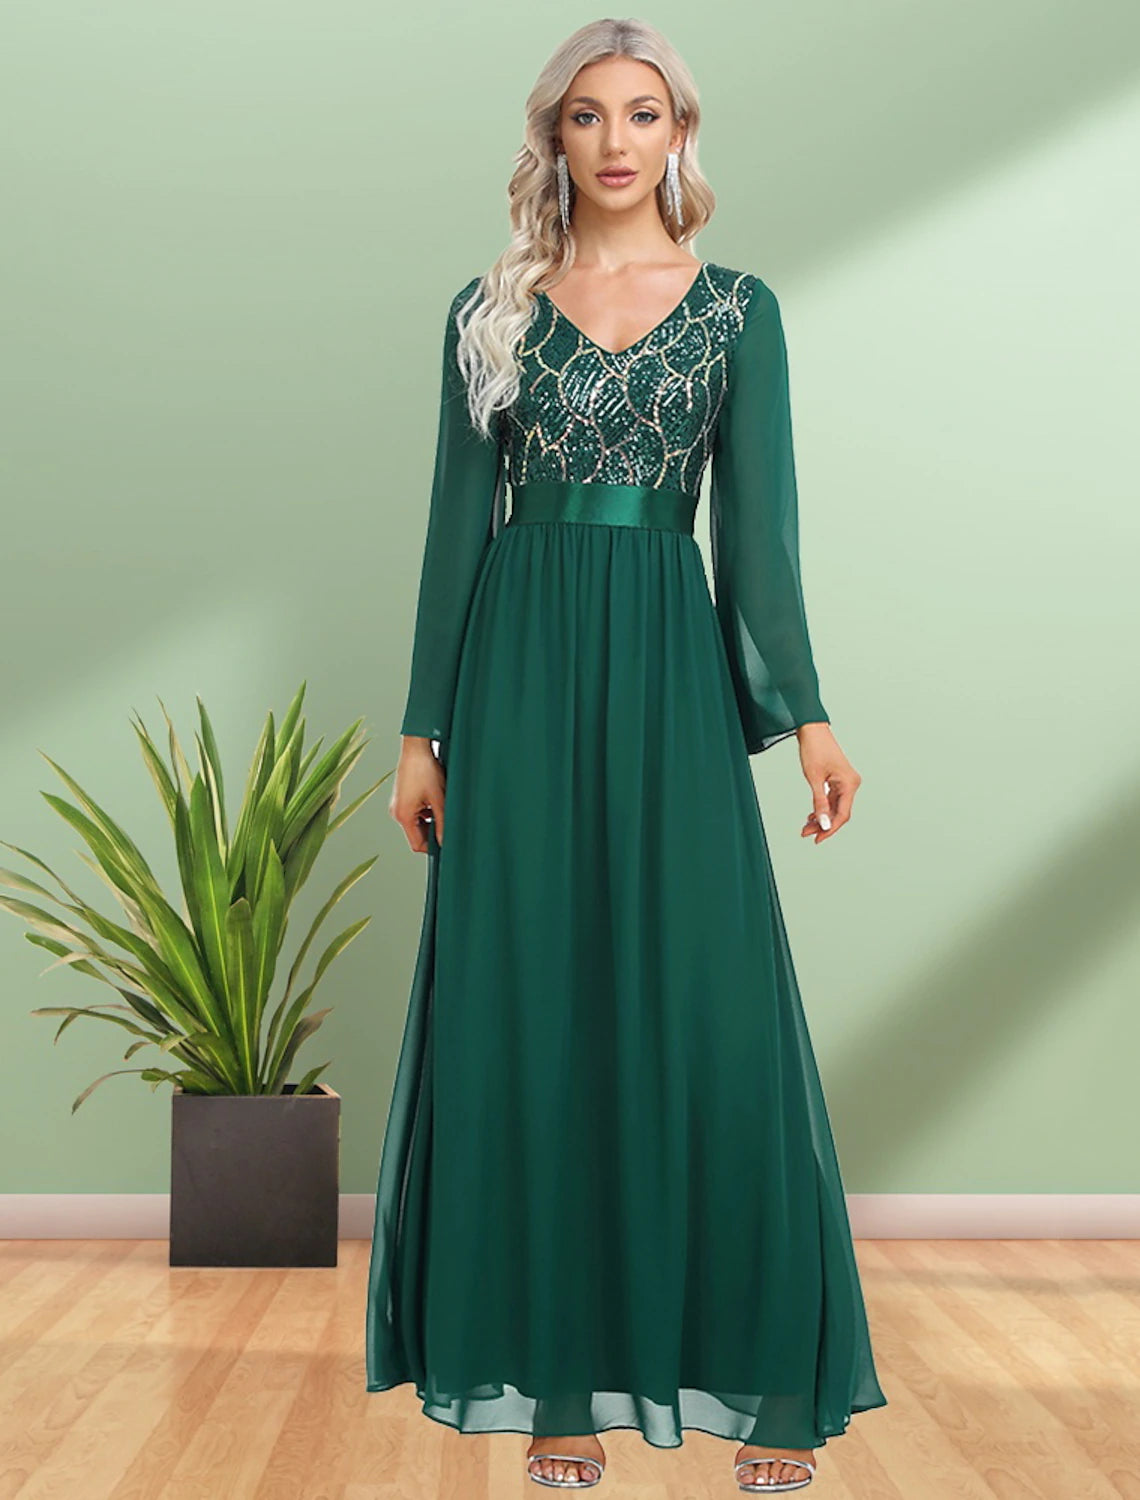 A-Line Evening Gown Sparkle & Shine Dress Party Wear Wedding Guest Floor Length Long Sleeve V Neck Chiffon with Sequin